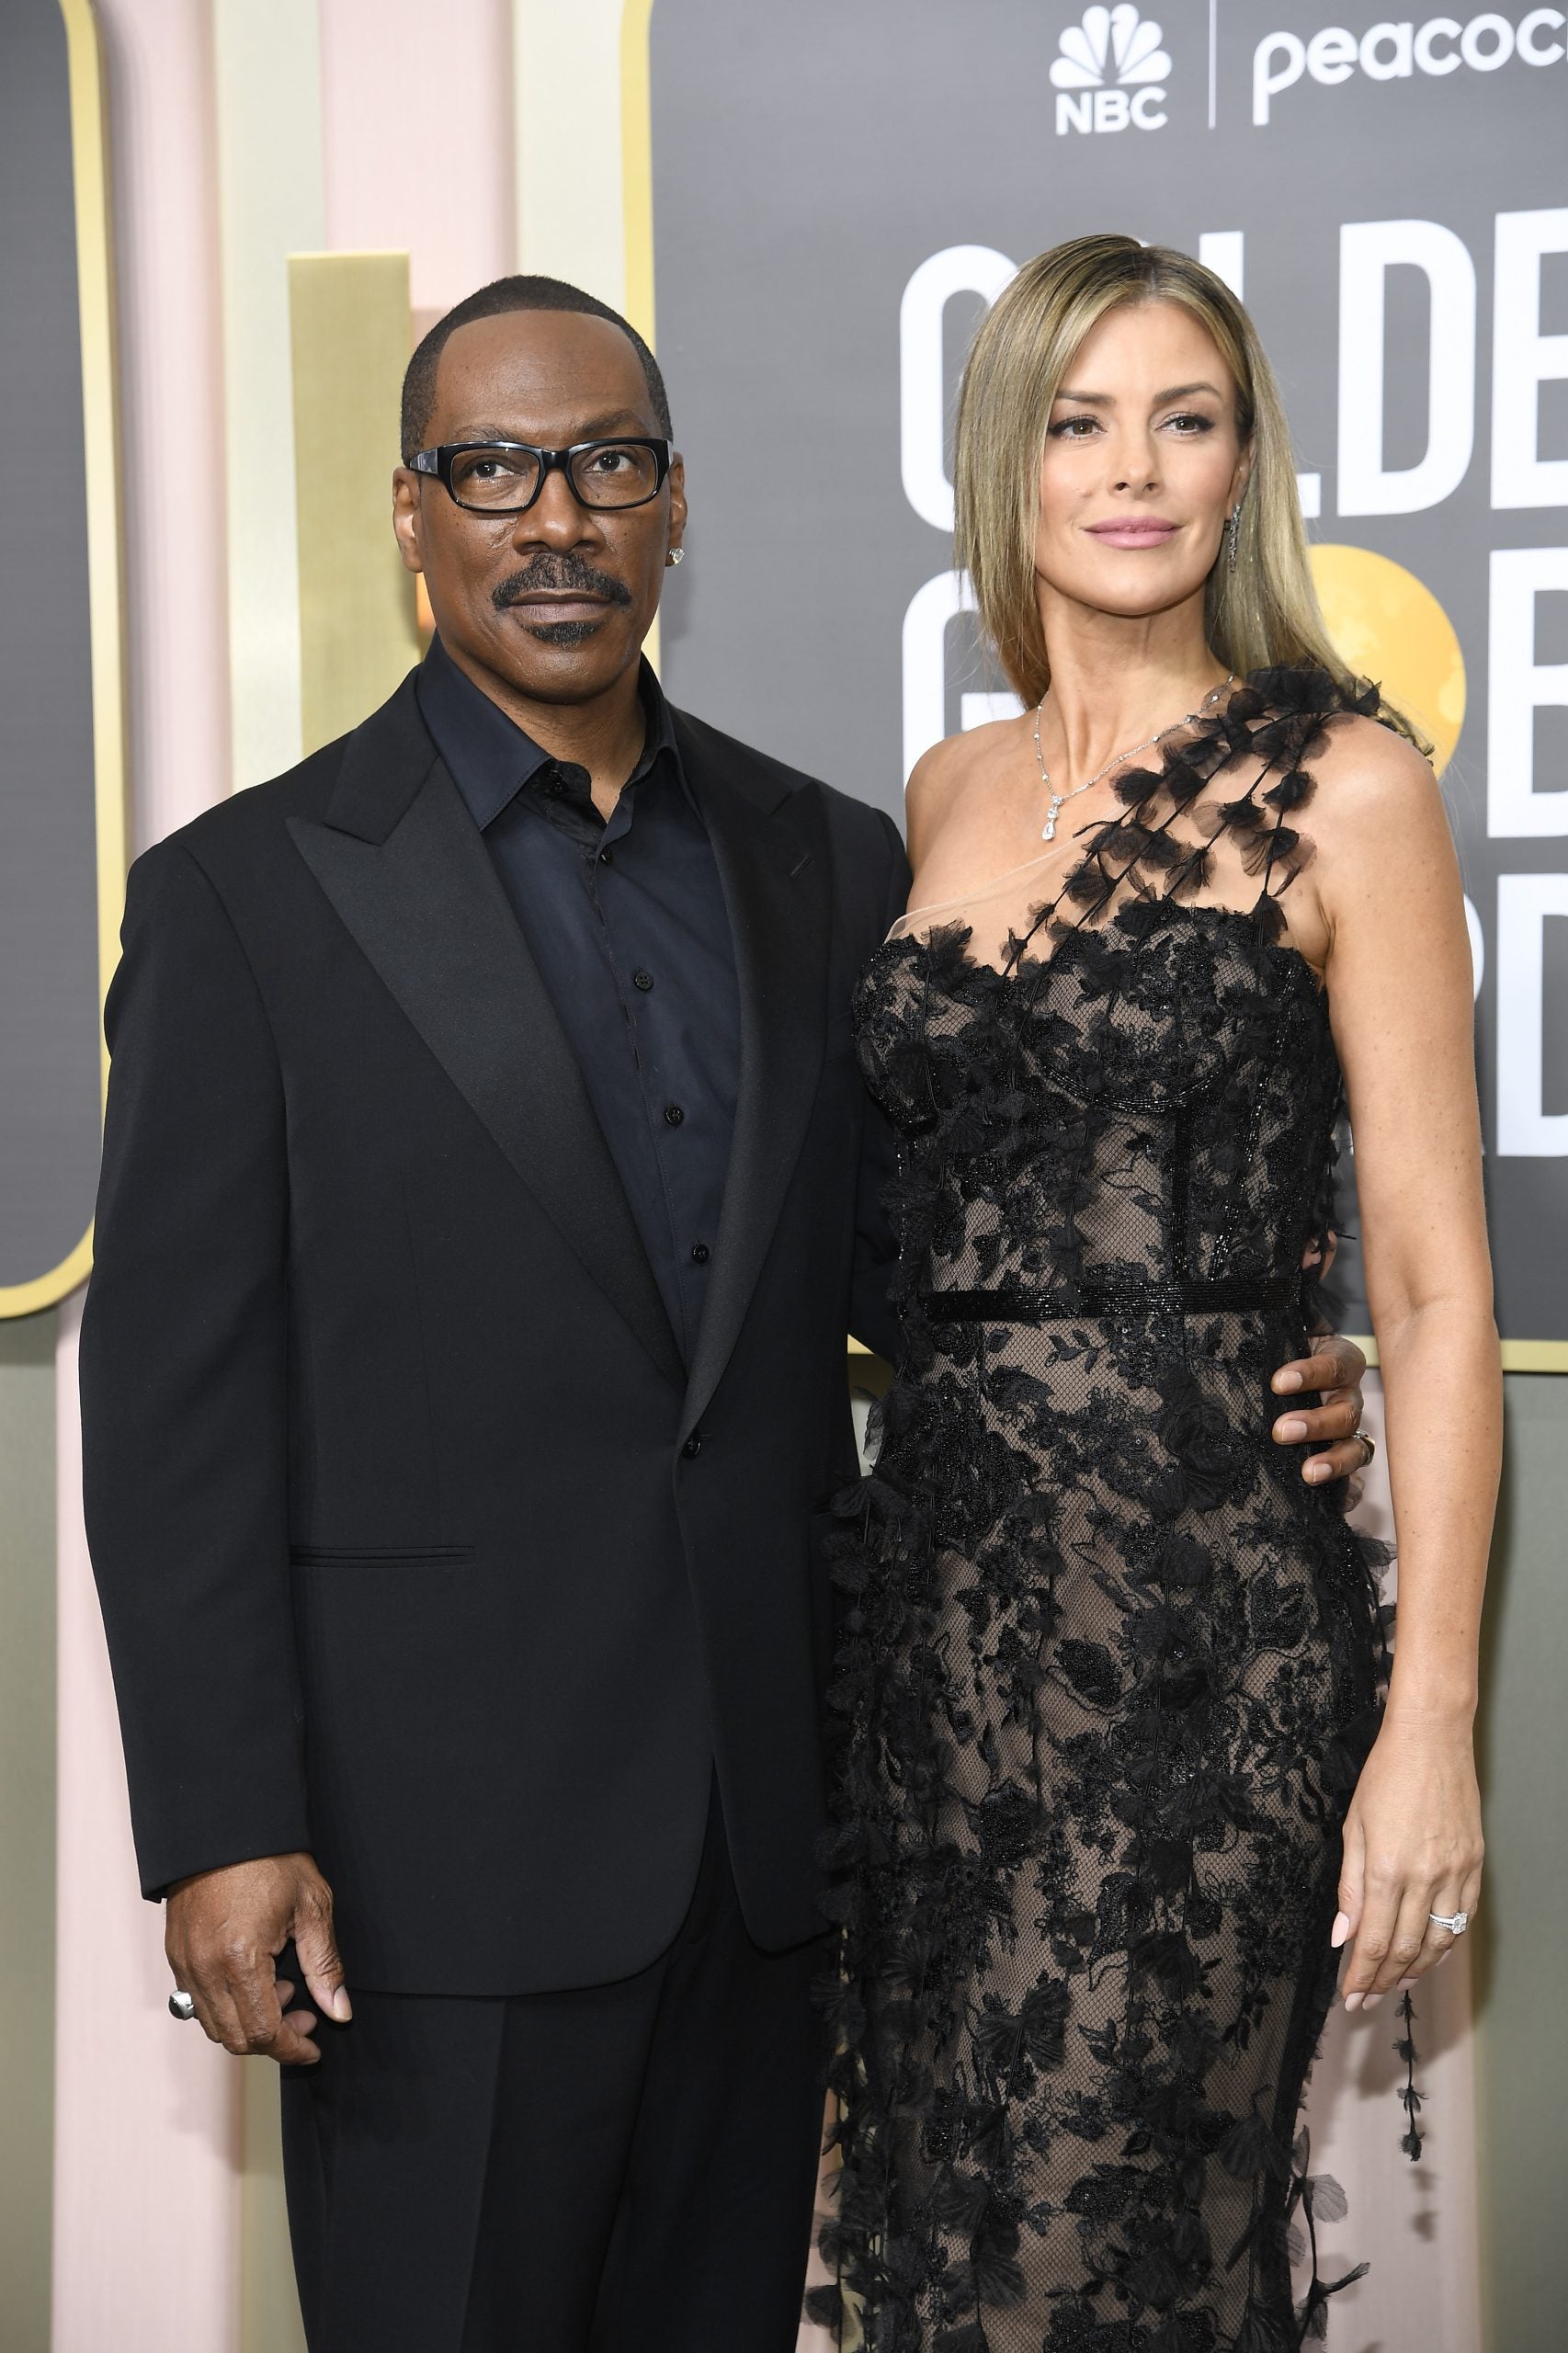 Star Gazing: The Hottest Celebrity Couples At The Golden Globes